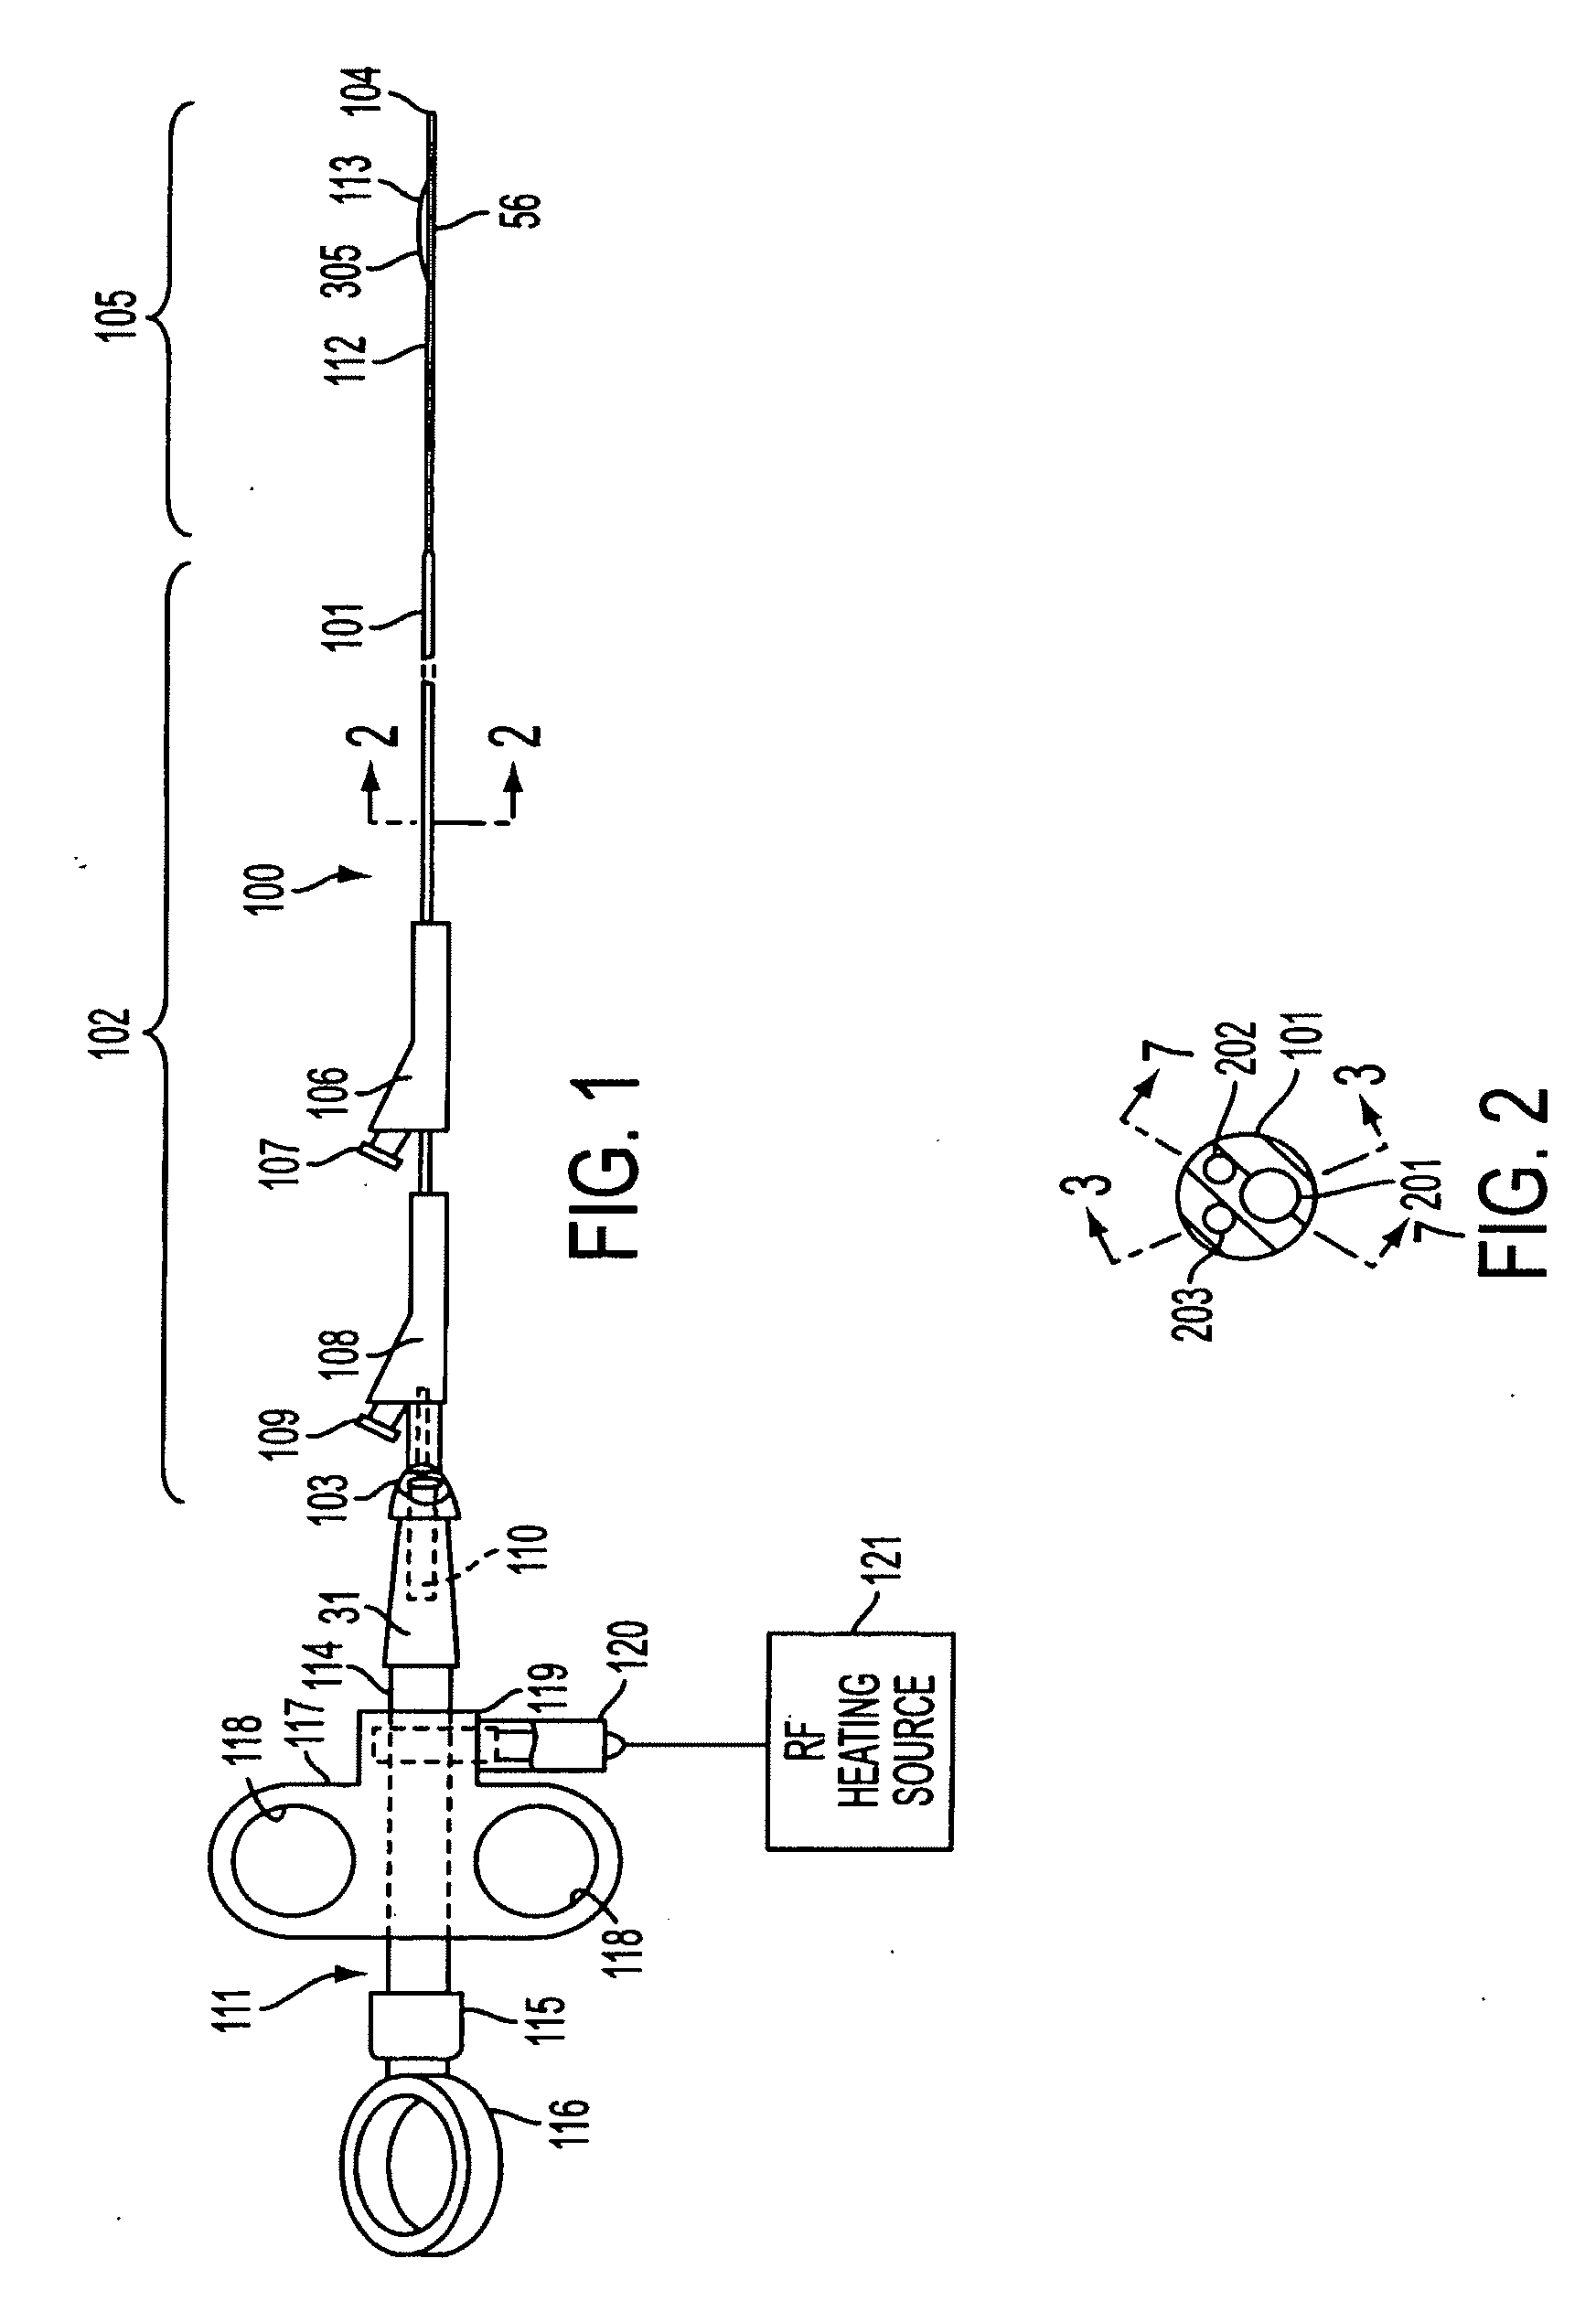 Method and Apparatus for Measuring and Controlling Blade Depth of a Tissue Cutting Apparatus in an Endoscopic Catheter